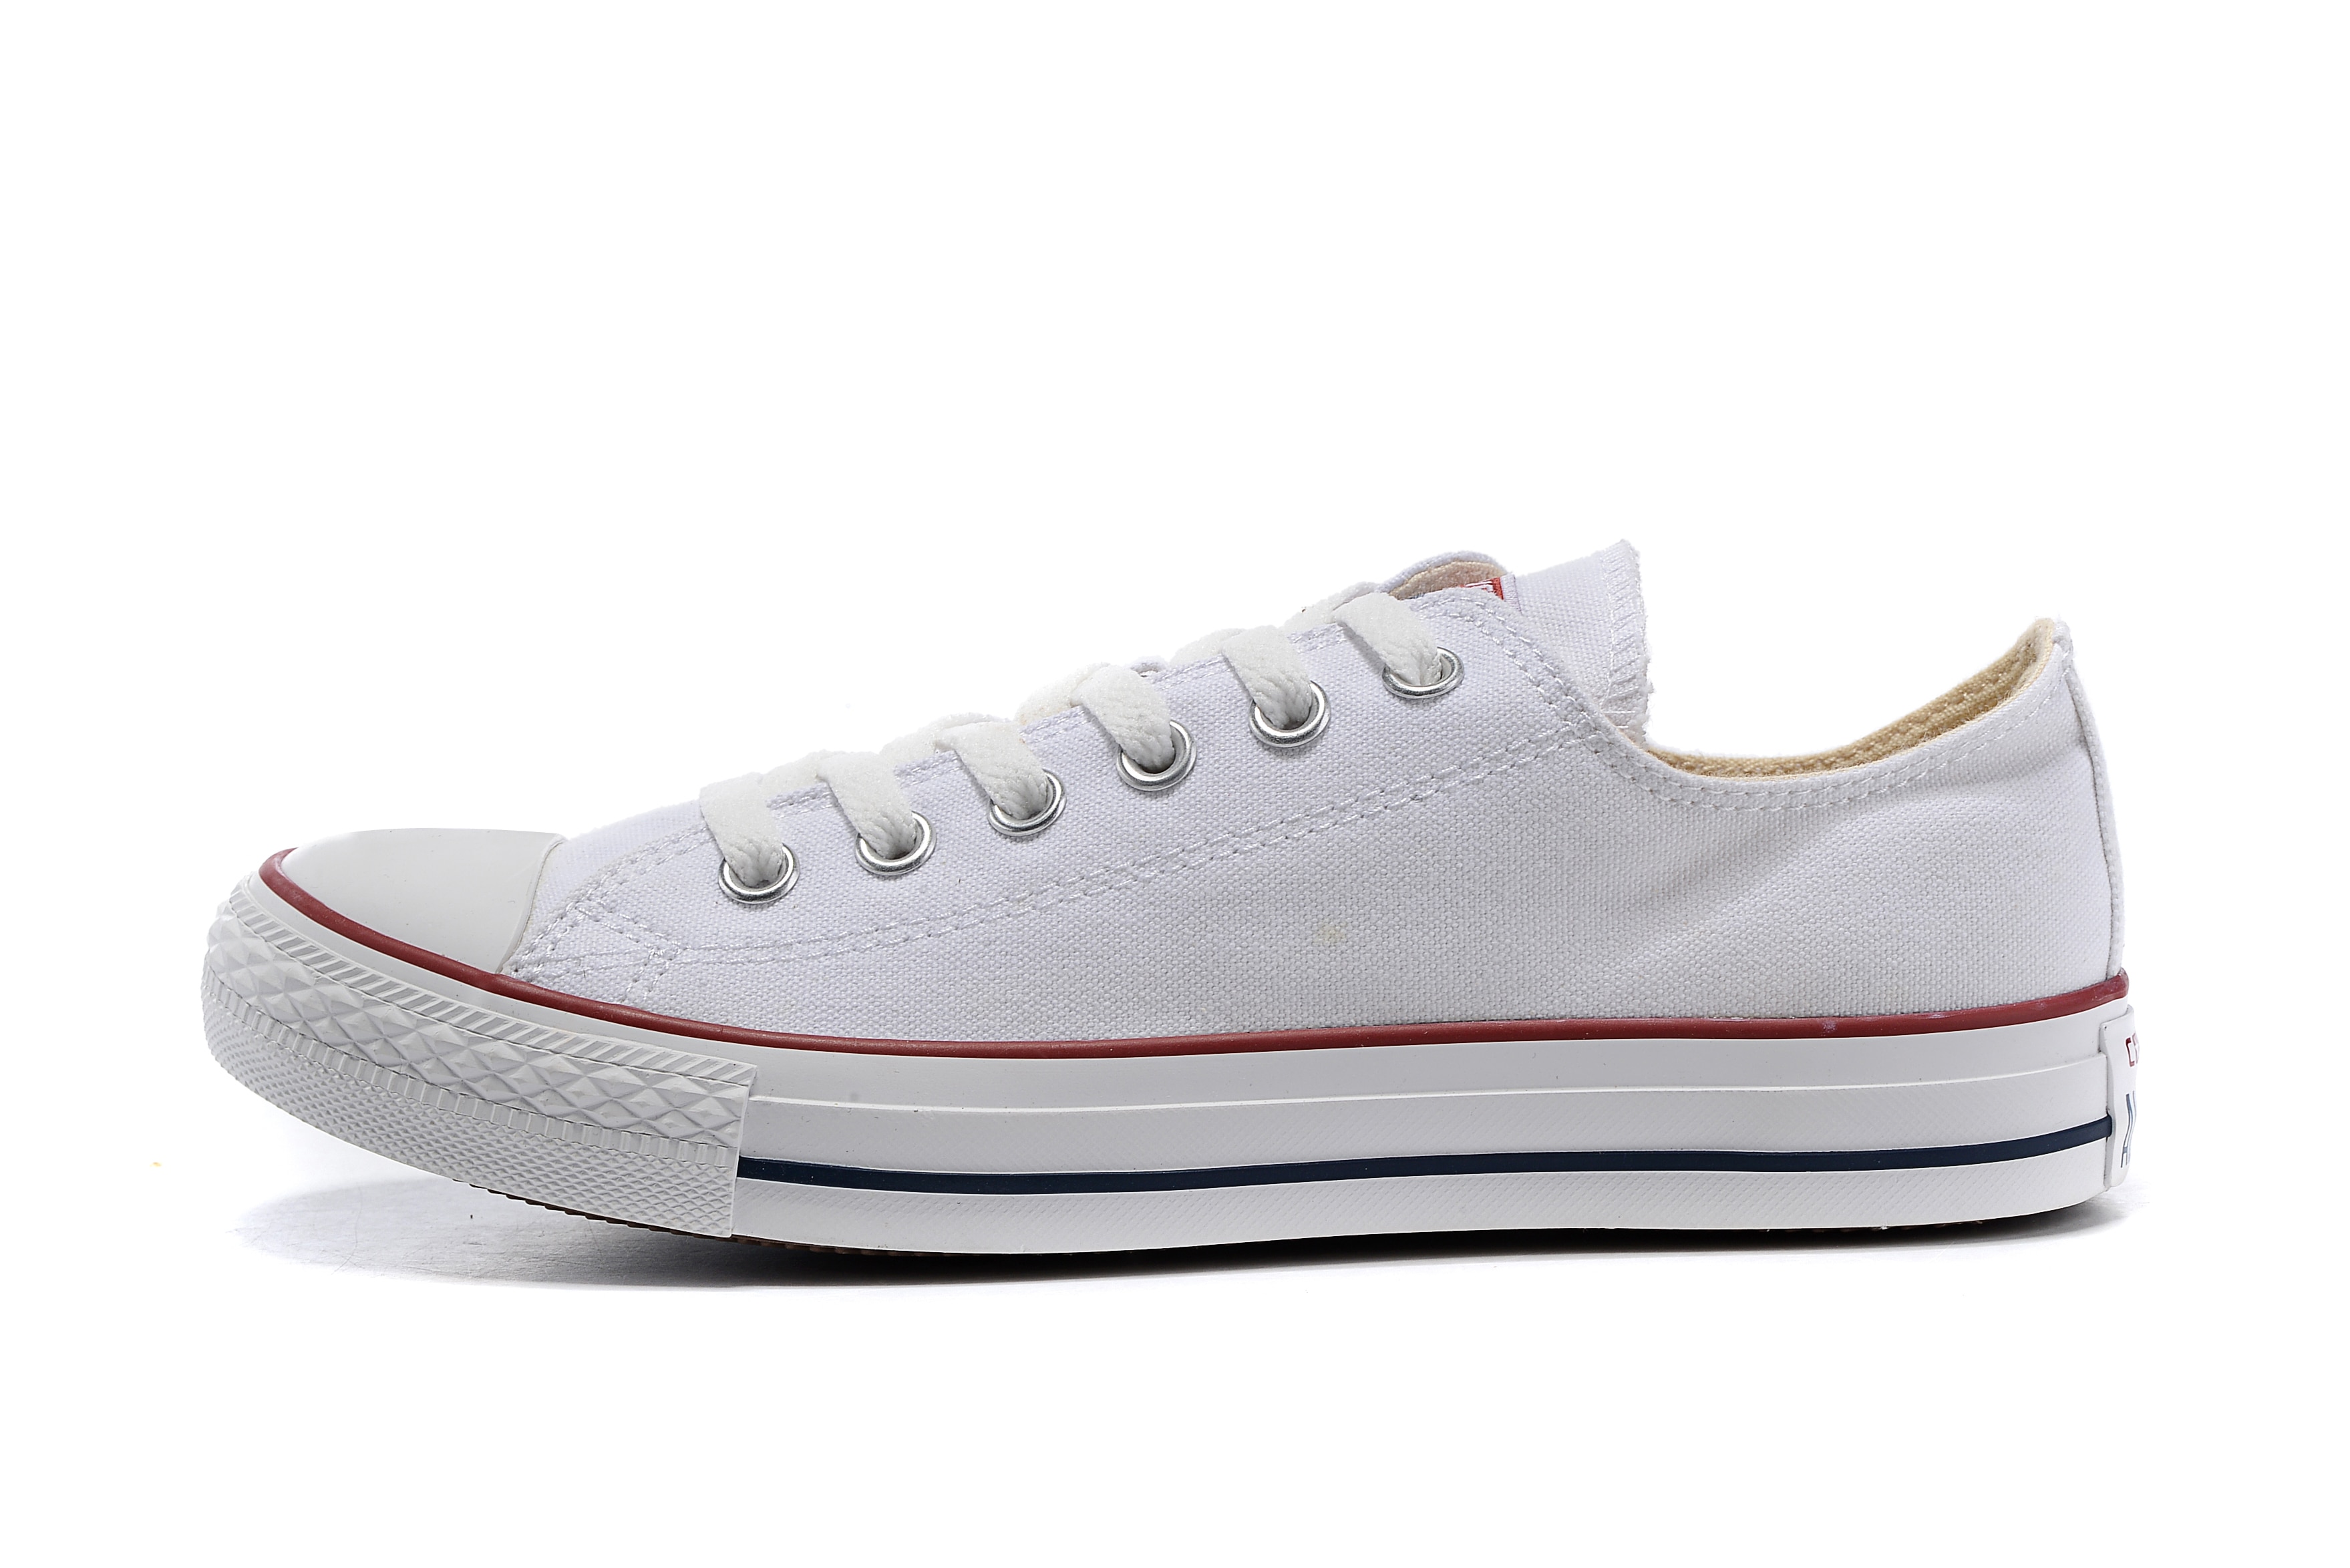 converse Classic all star men & women High Top Sneakers Casual Canvas Sport Shoes Unisex shoes converse shoes